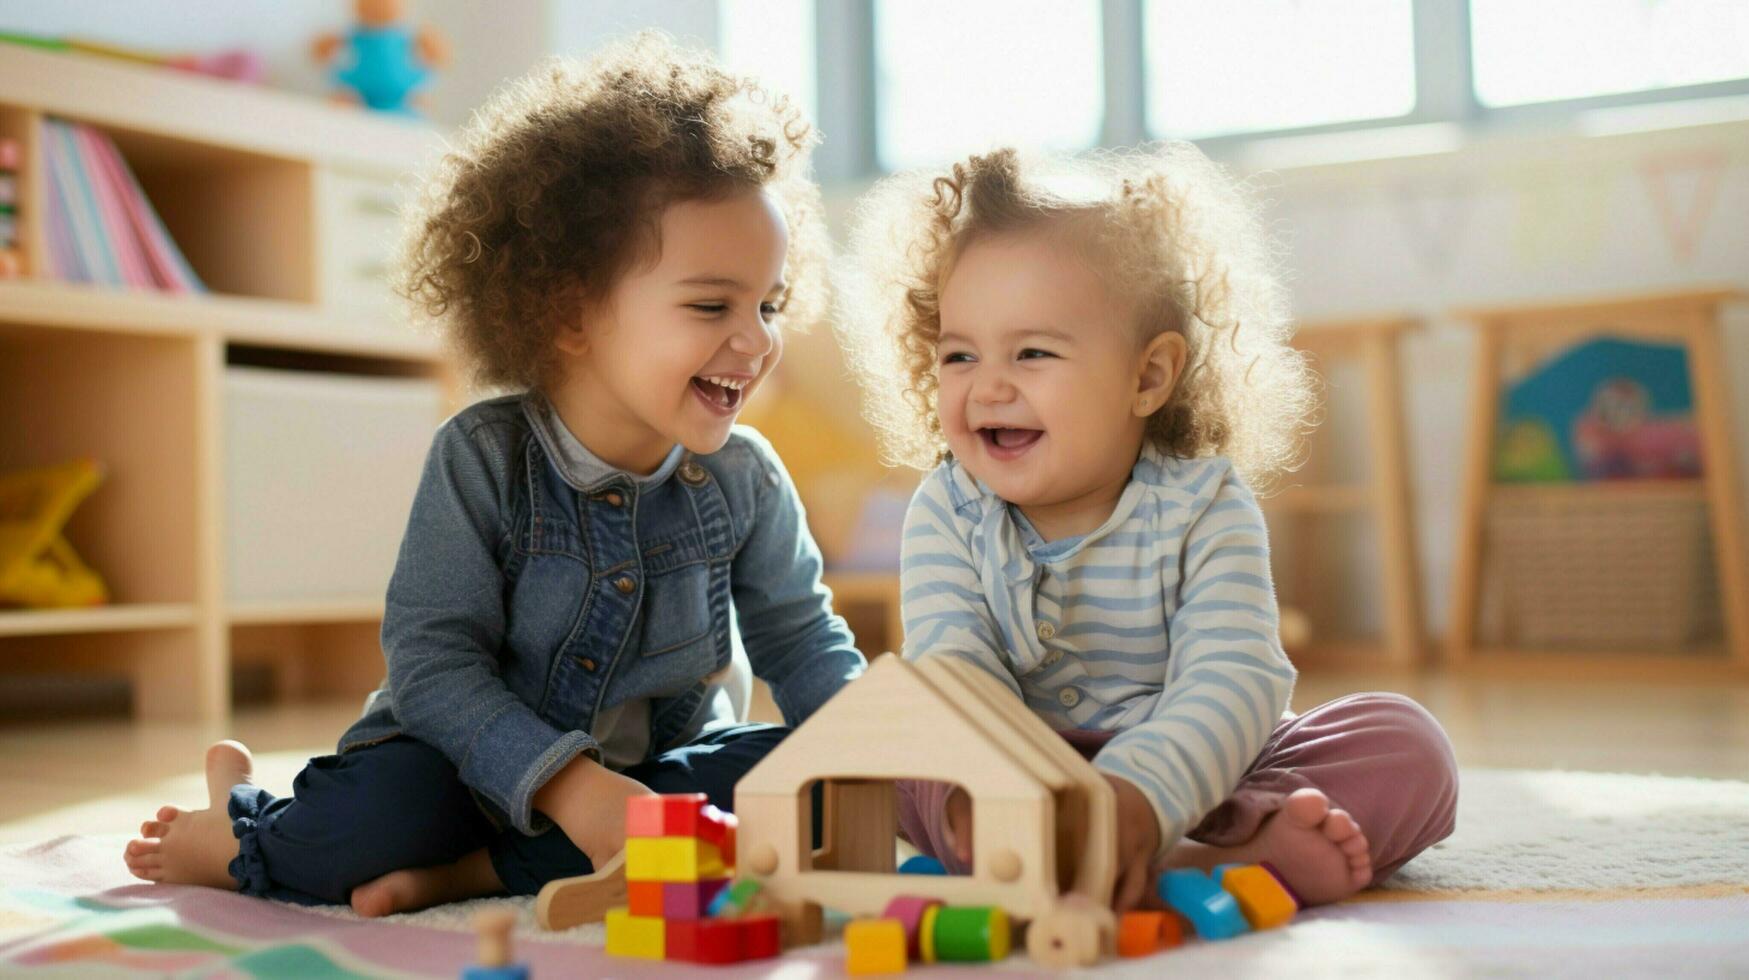 young children smiling learning and playing together indoor photo